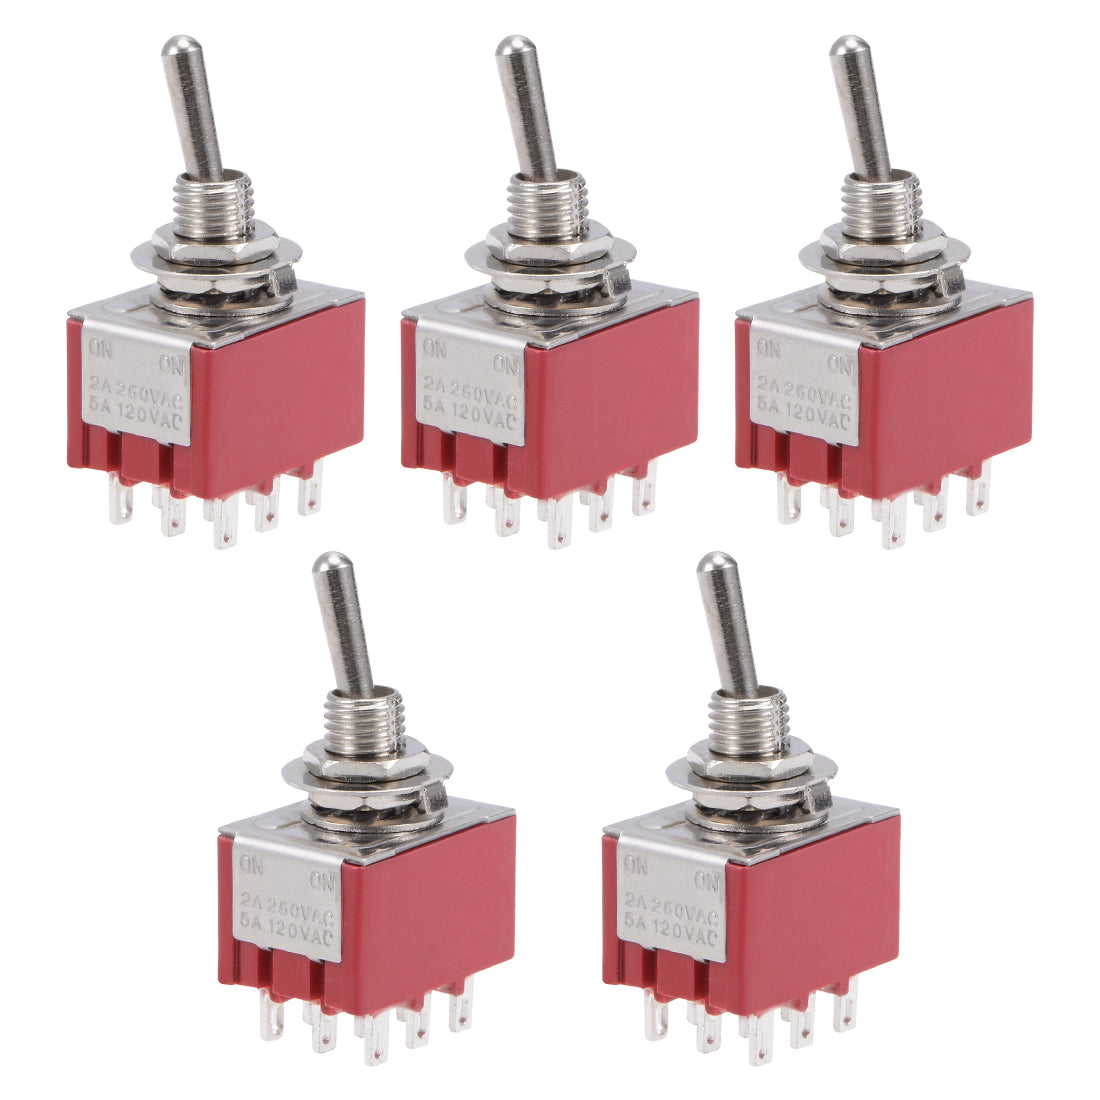 uxcell Uxcell 5Pcs Latching Rocker Toggle Switch 2A250VAC/5A120VAC 9P ON-ON  MTS-302 Red